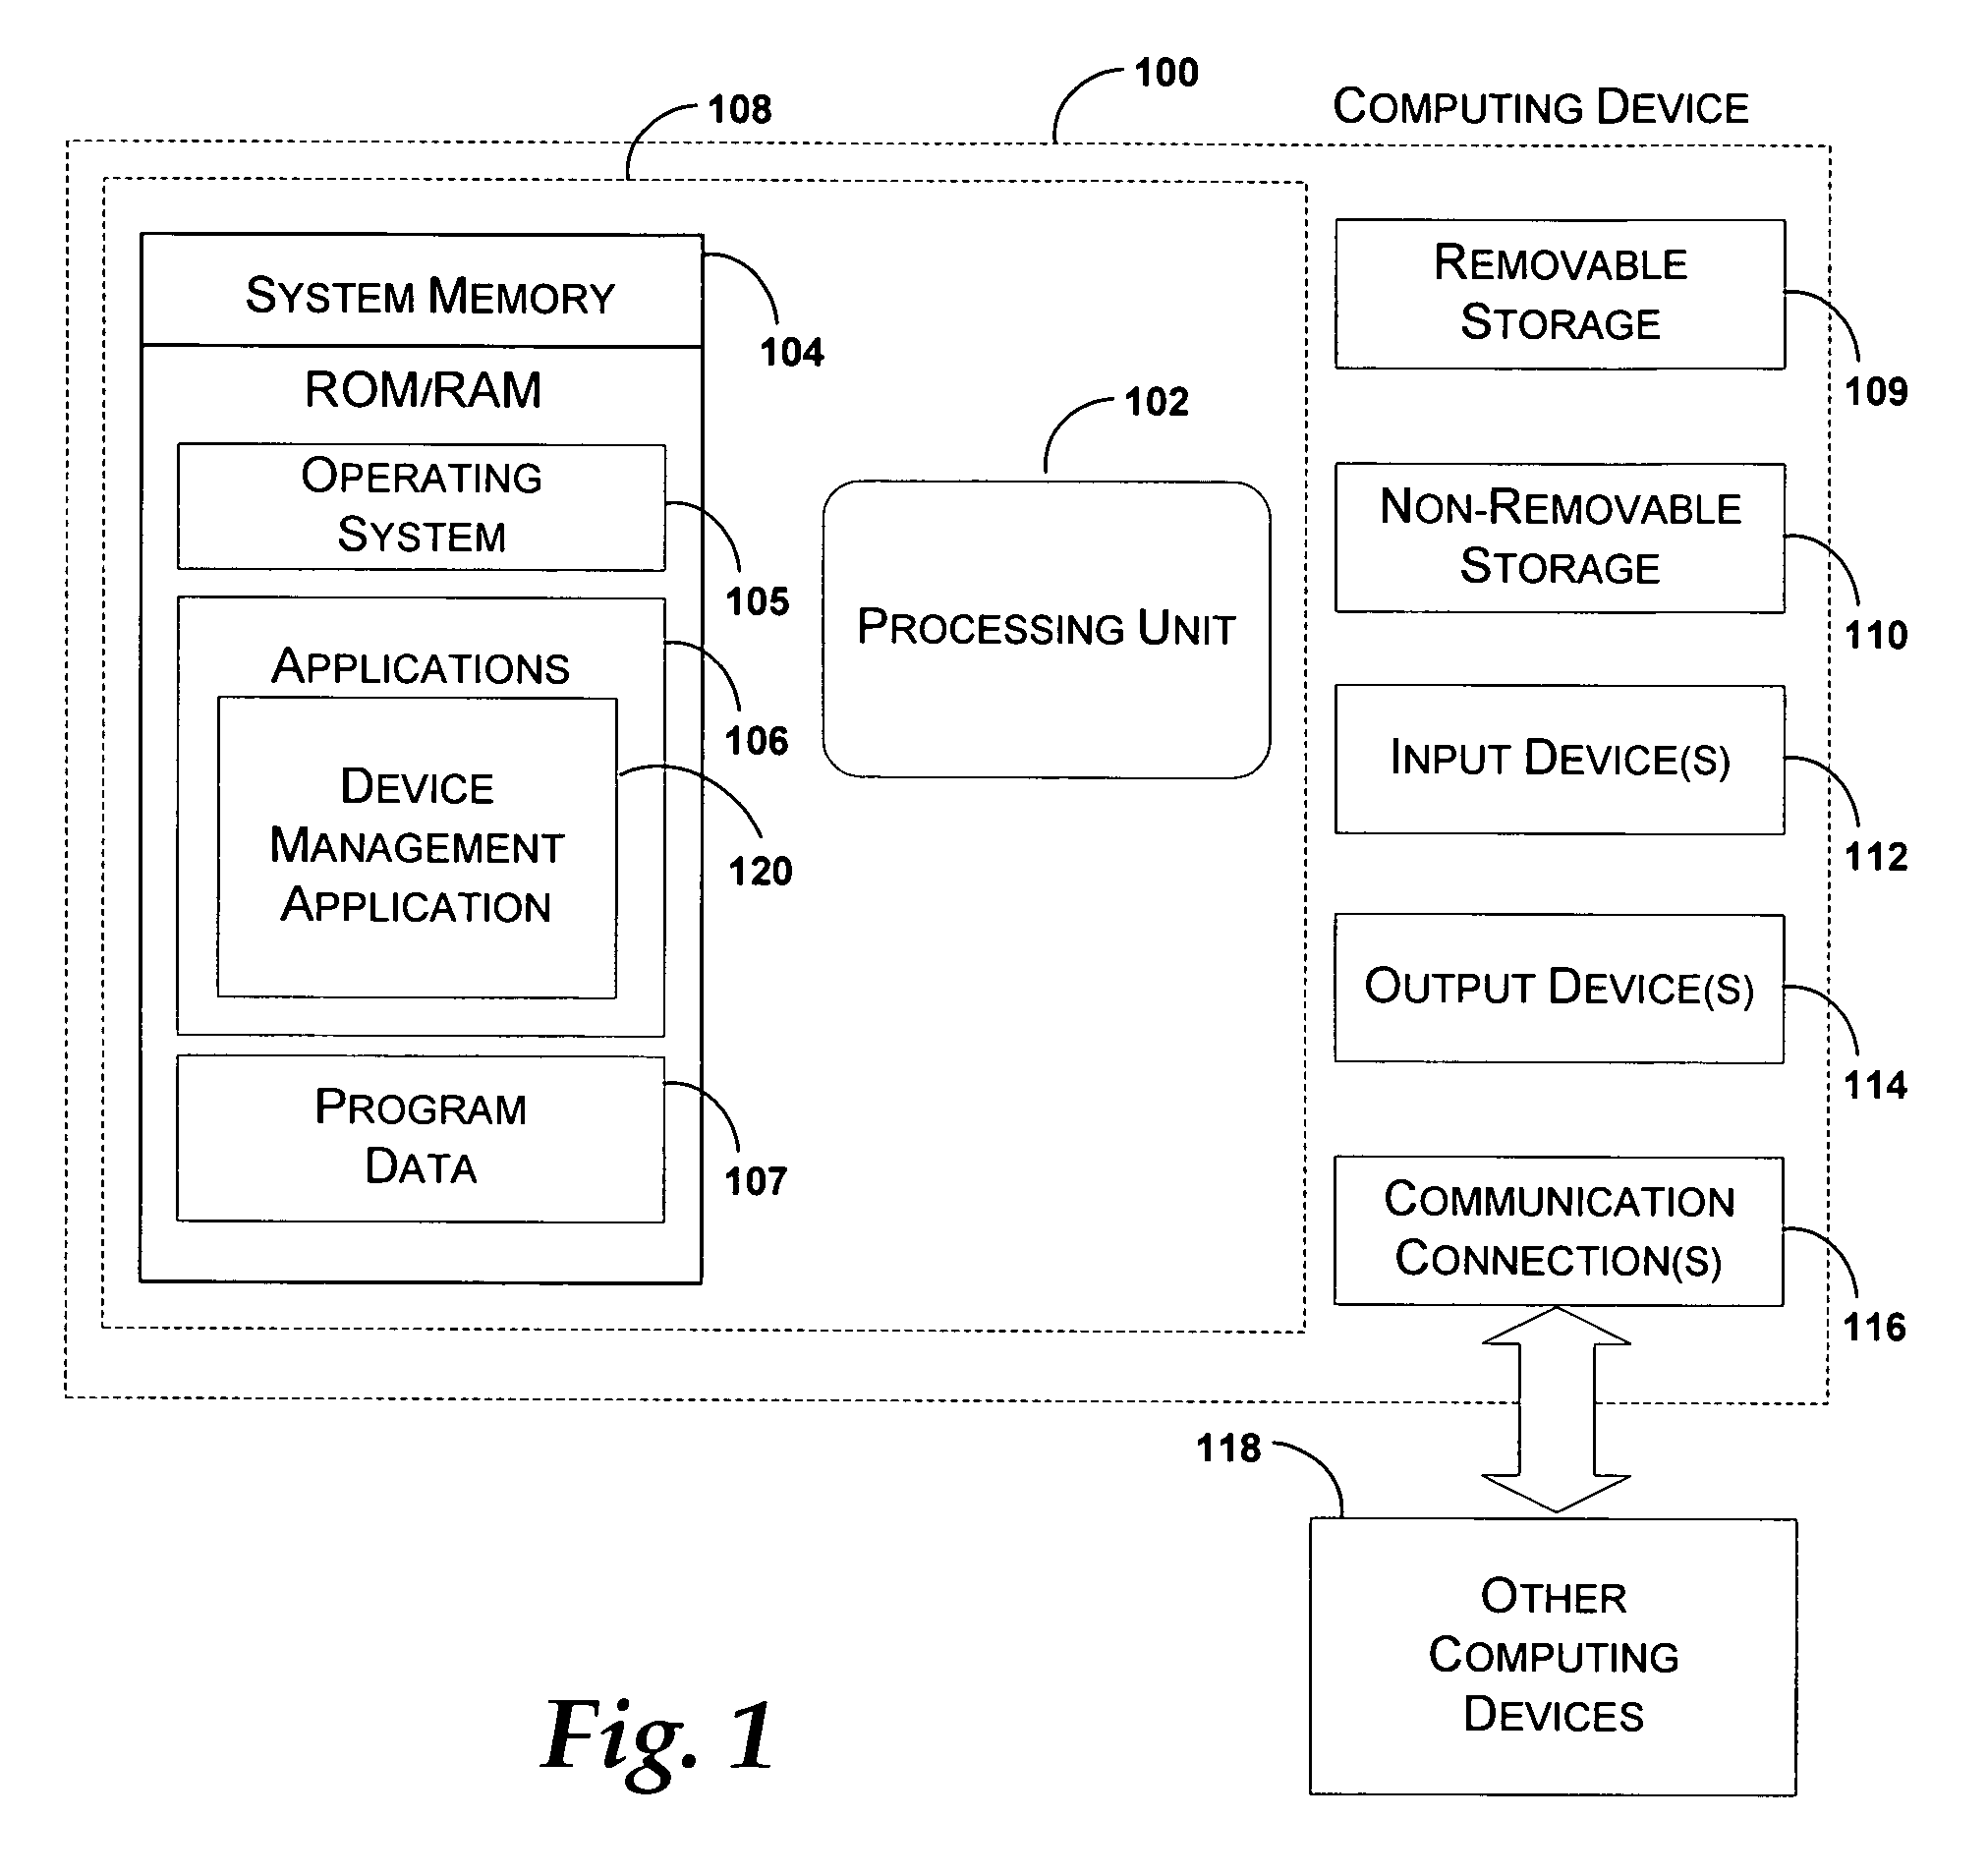 Connectivity objects under a mobile device management tree